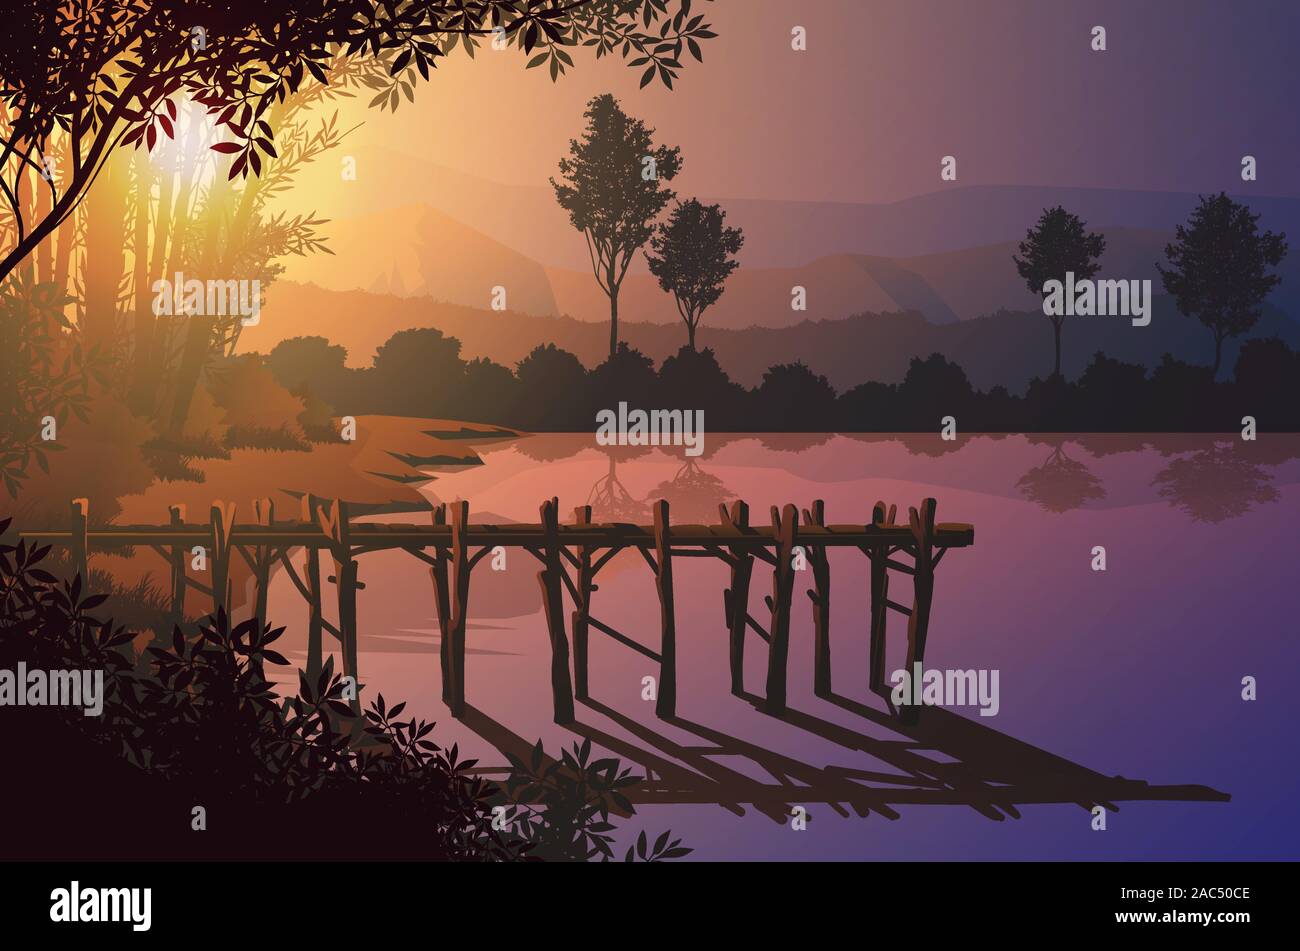 Wooden port at the edge of the marsh Natural forest mountains horizon trees Landscape wallpaper Sunrise and sunset Illustration vector style Stock Vector